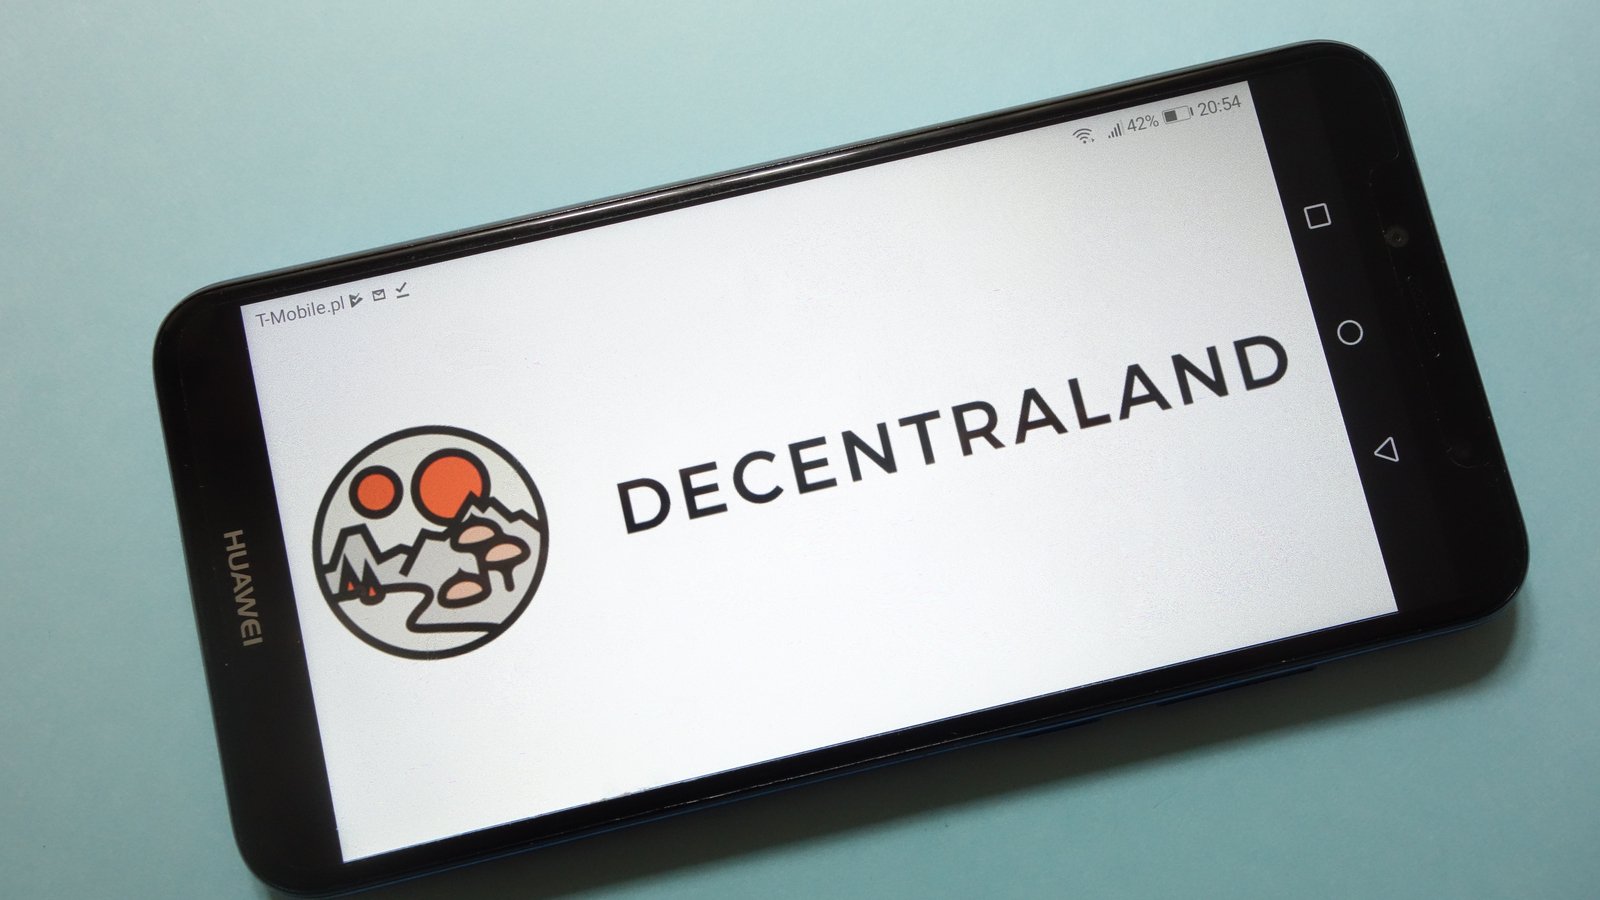 Decentraland logo displayed on smartphone screen, teal background behind the phone